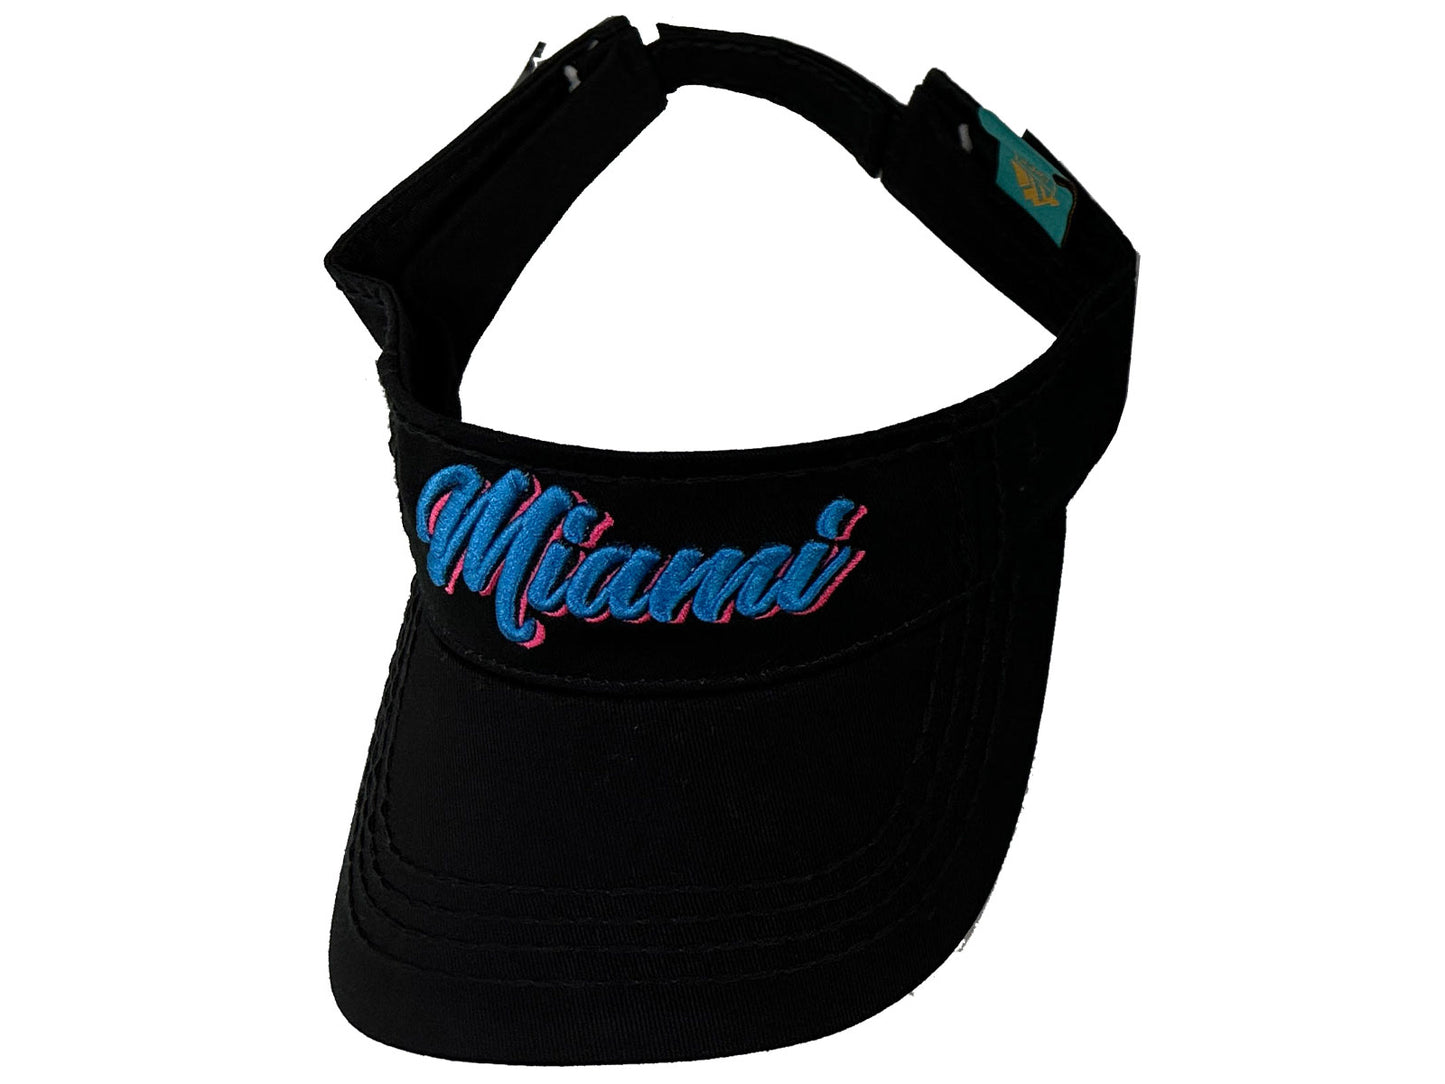 Miami Florida Style Visor Hat Adult Size- Women's and Men's Colors - One Size Fits Most